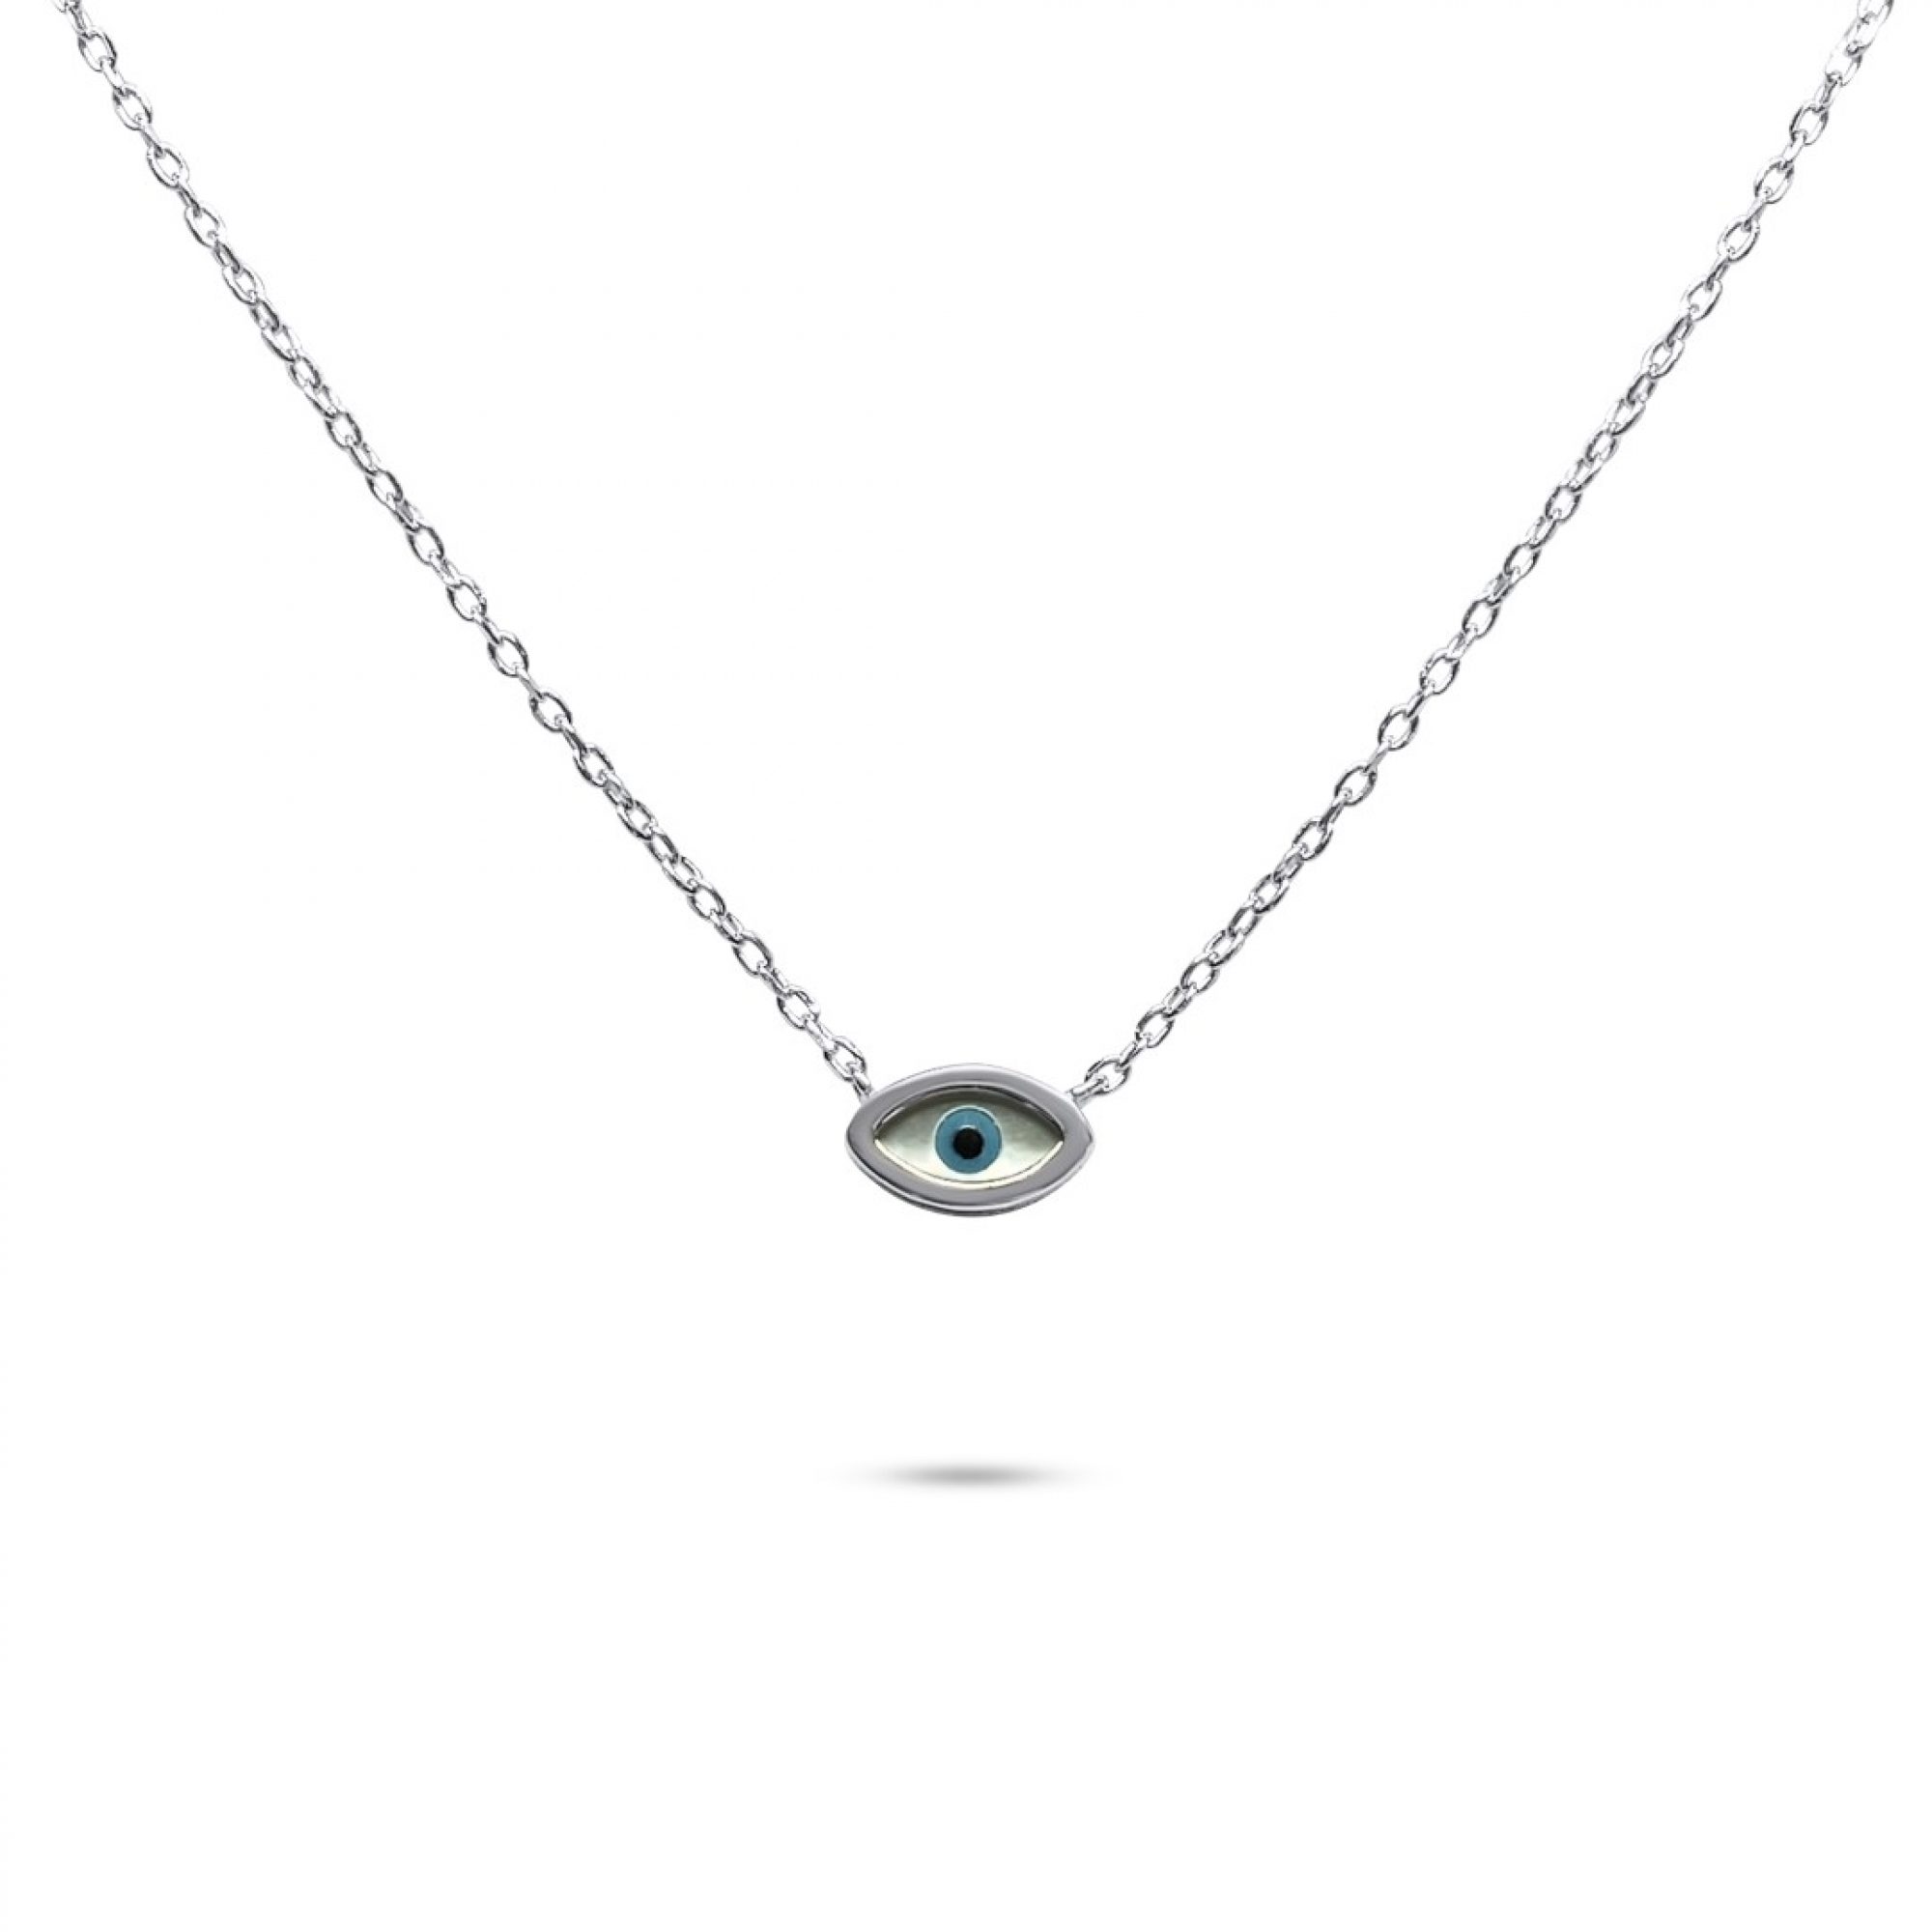 Eye necklace with mother of pearl